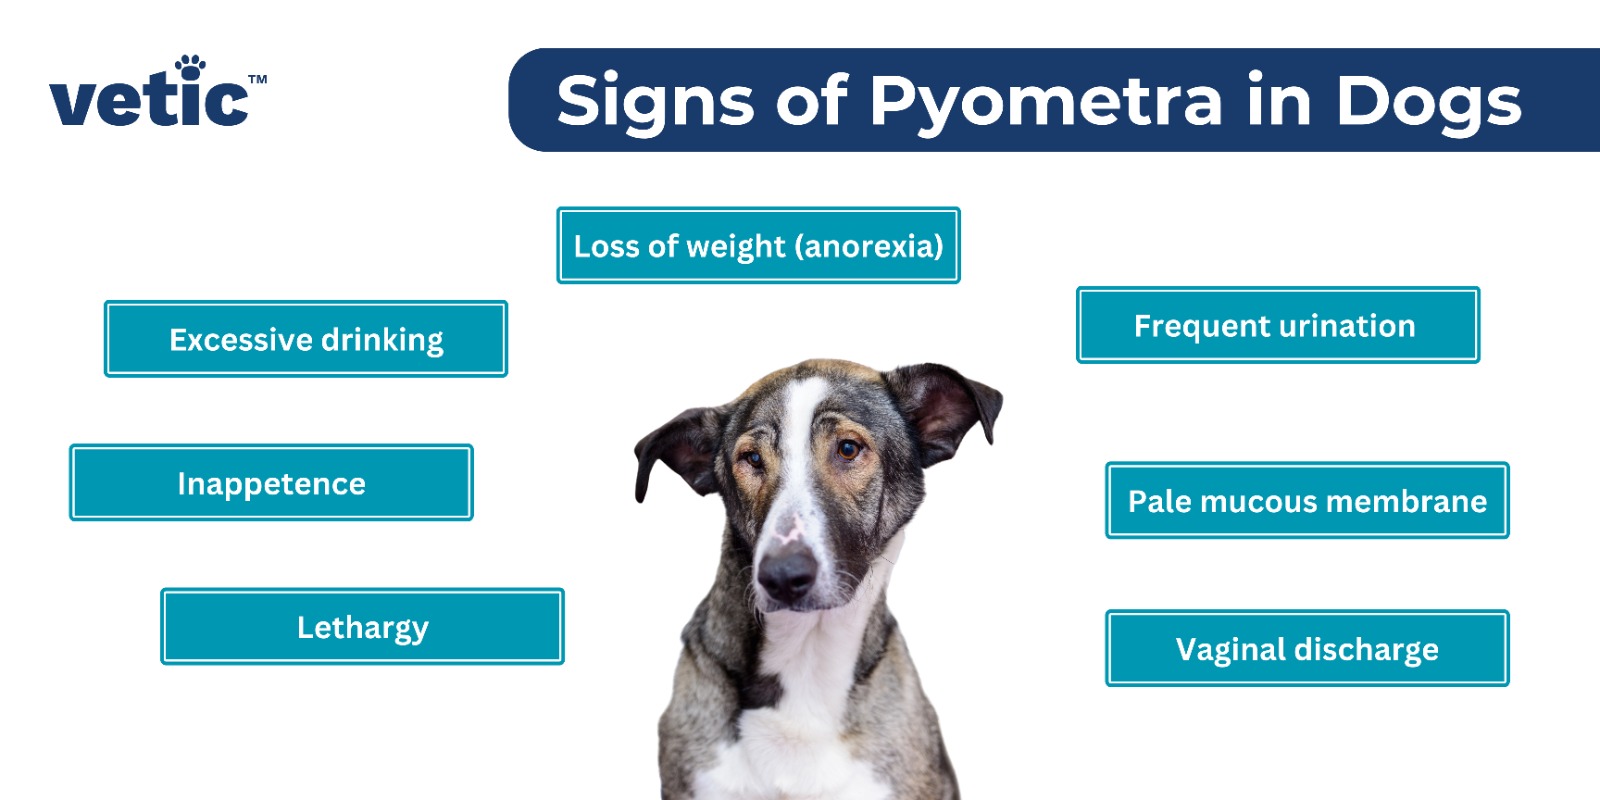 infographic on signs of pyometra in dogs. the signs include Lethargy Inappetence Excessive drinking Loss of weight (anorexia) Frequent urination Pale mucous membrane Pus or bloody vaginal discharge